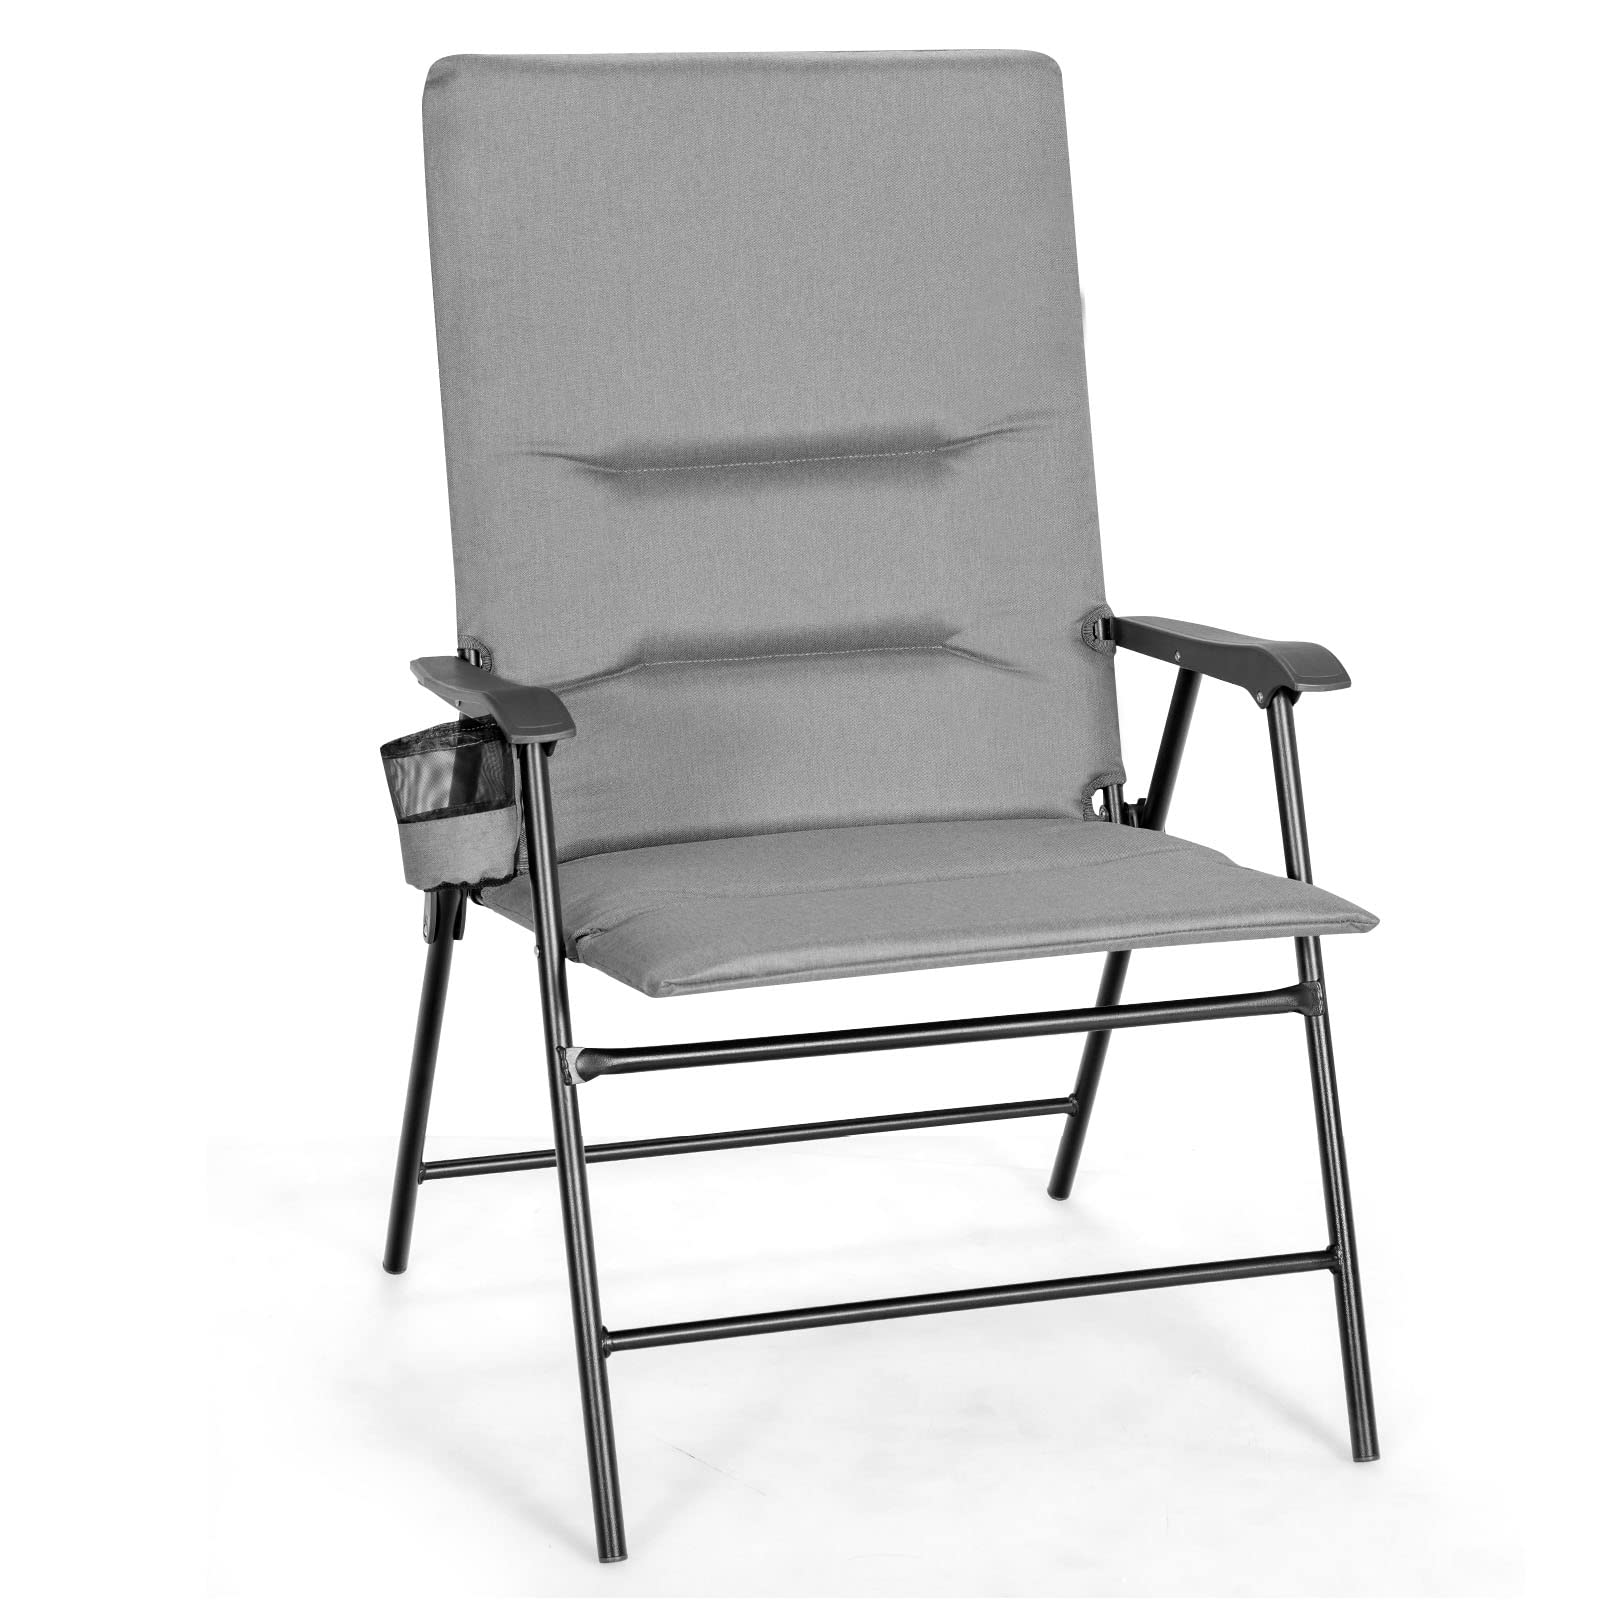 Giantex Folding Patio Chairs, Outdoor Lawn Chairs